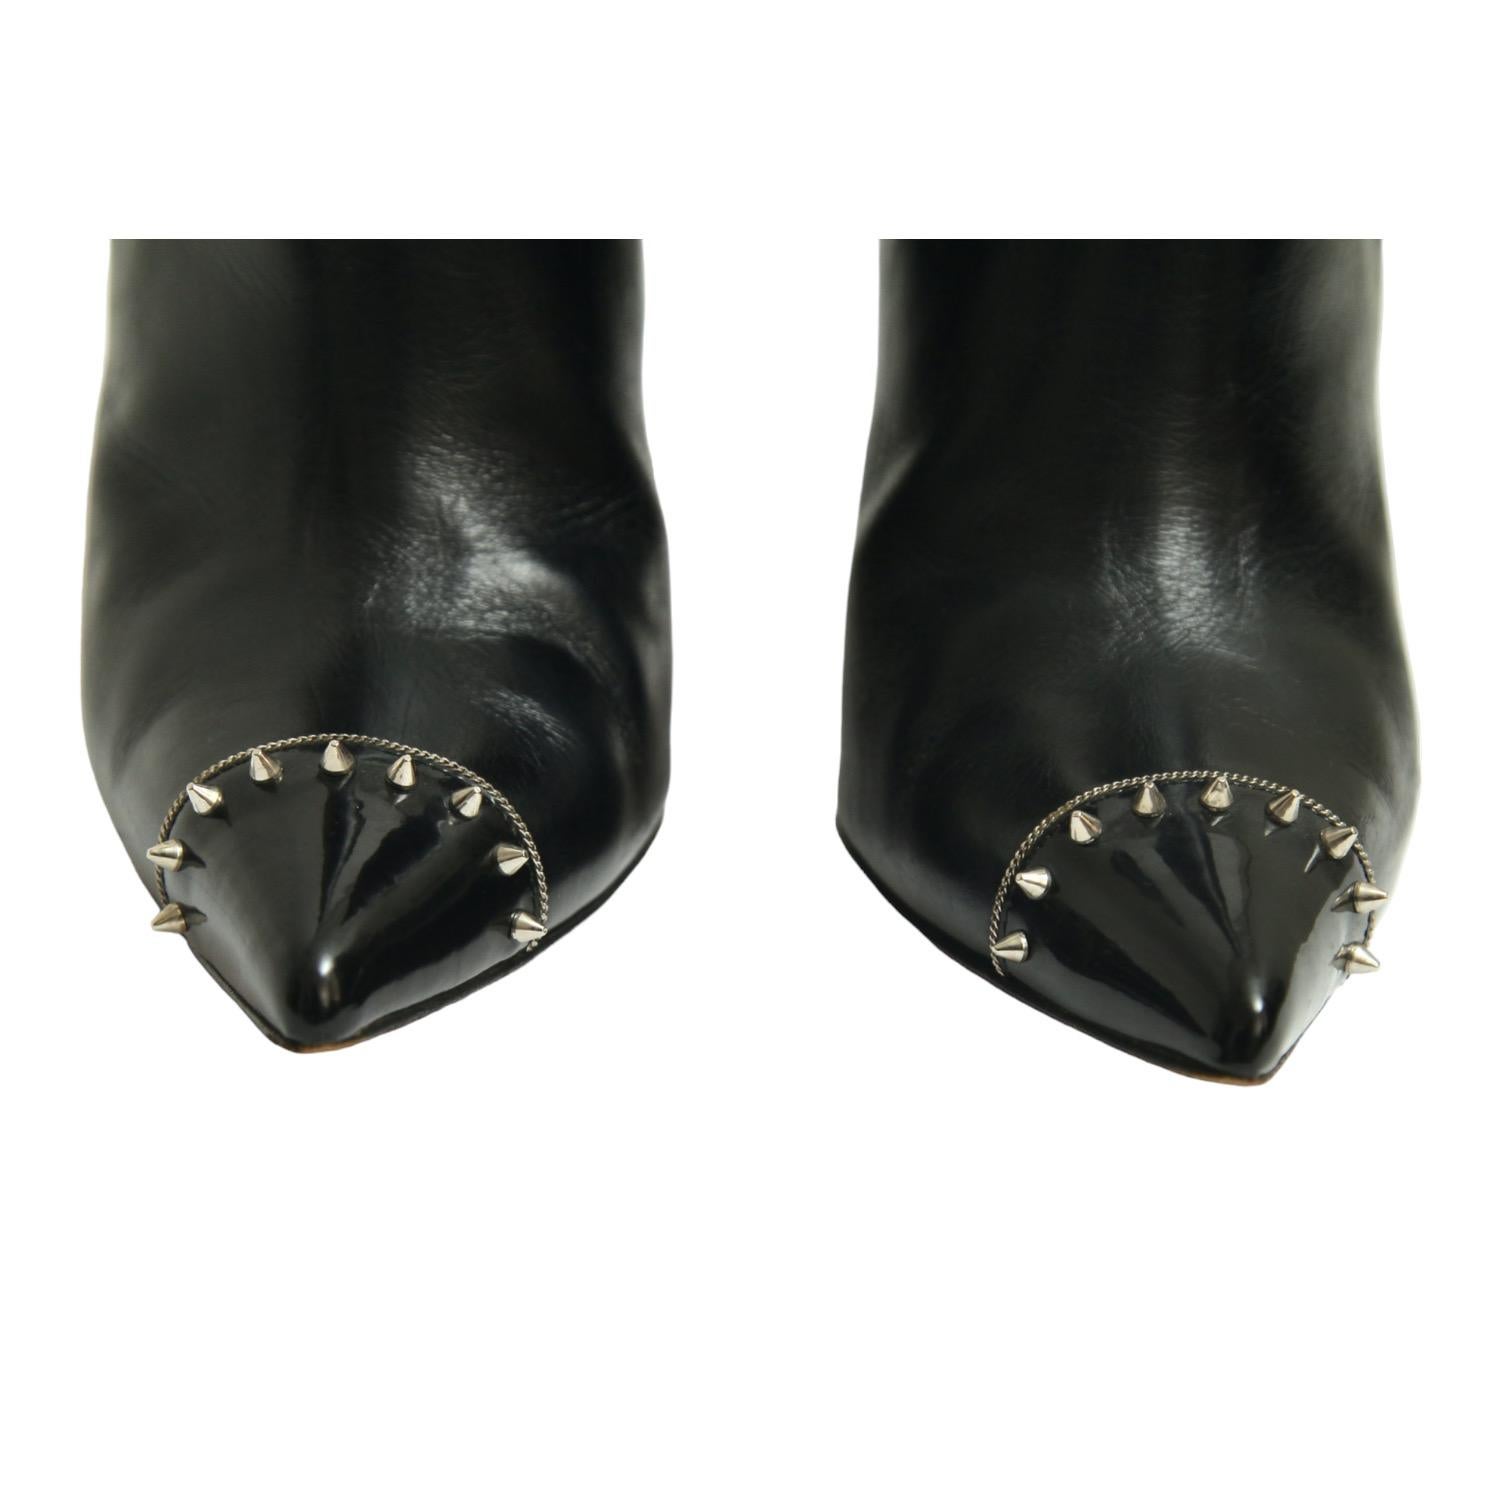 CHRISTIAN LOUBOUTIN Black Leather Bootie BANJO Ankle Boot Spiked Cap Toe 38.5 For Sale 2